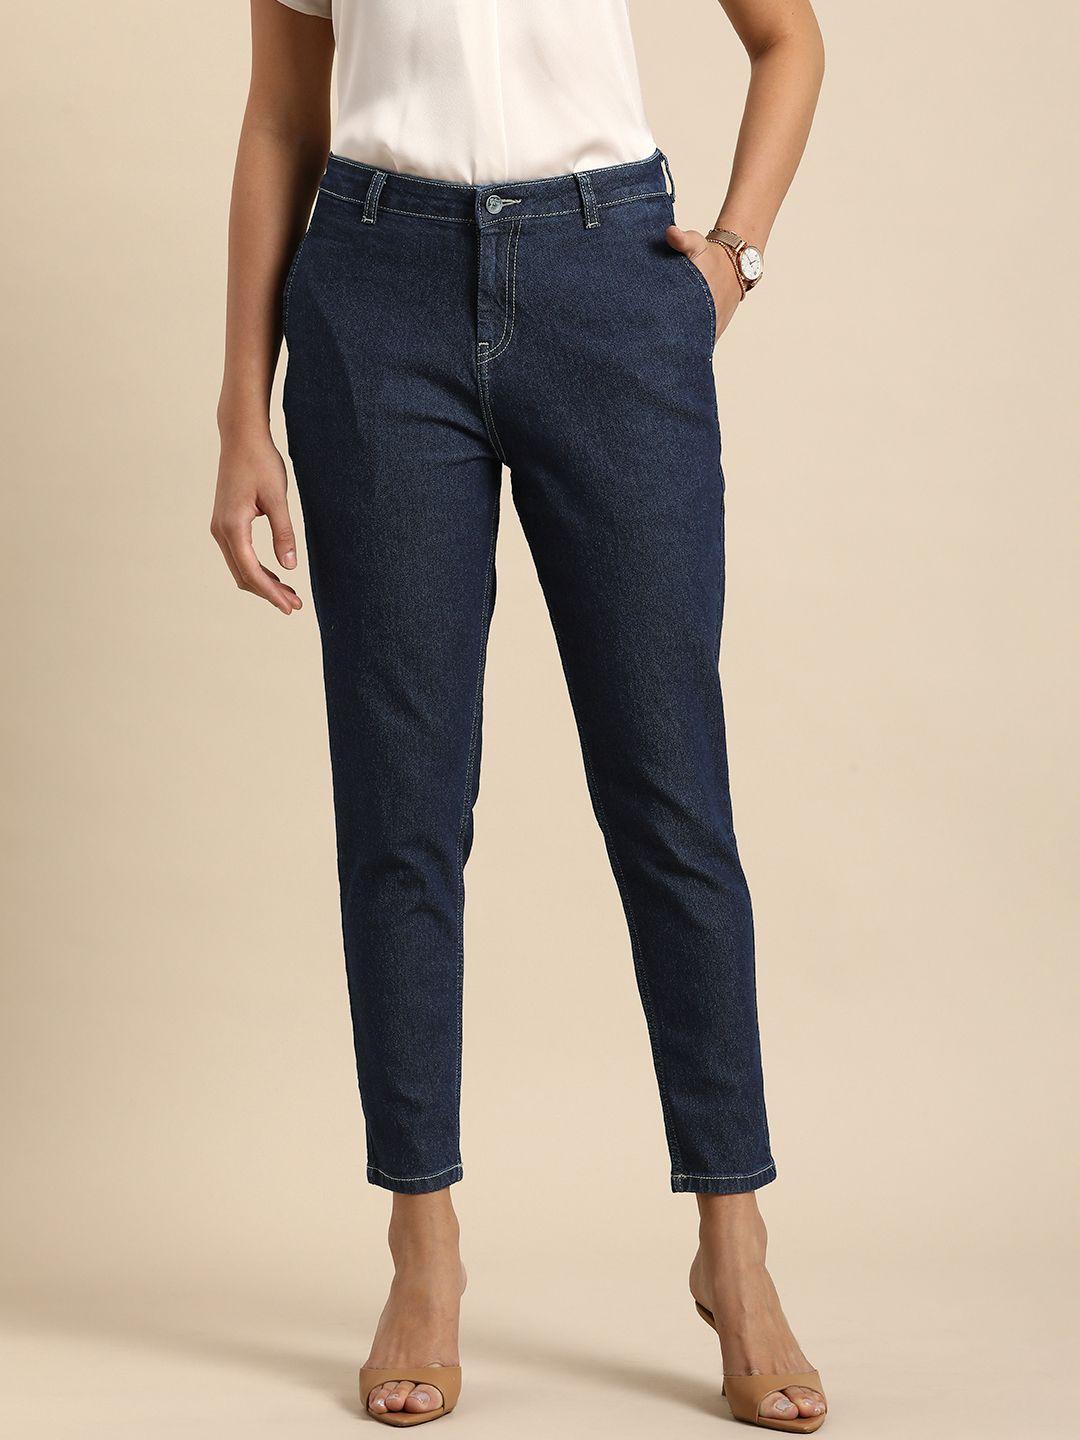 all-about-you-women-mom-fit-high-rise-stretchable-jeans